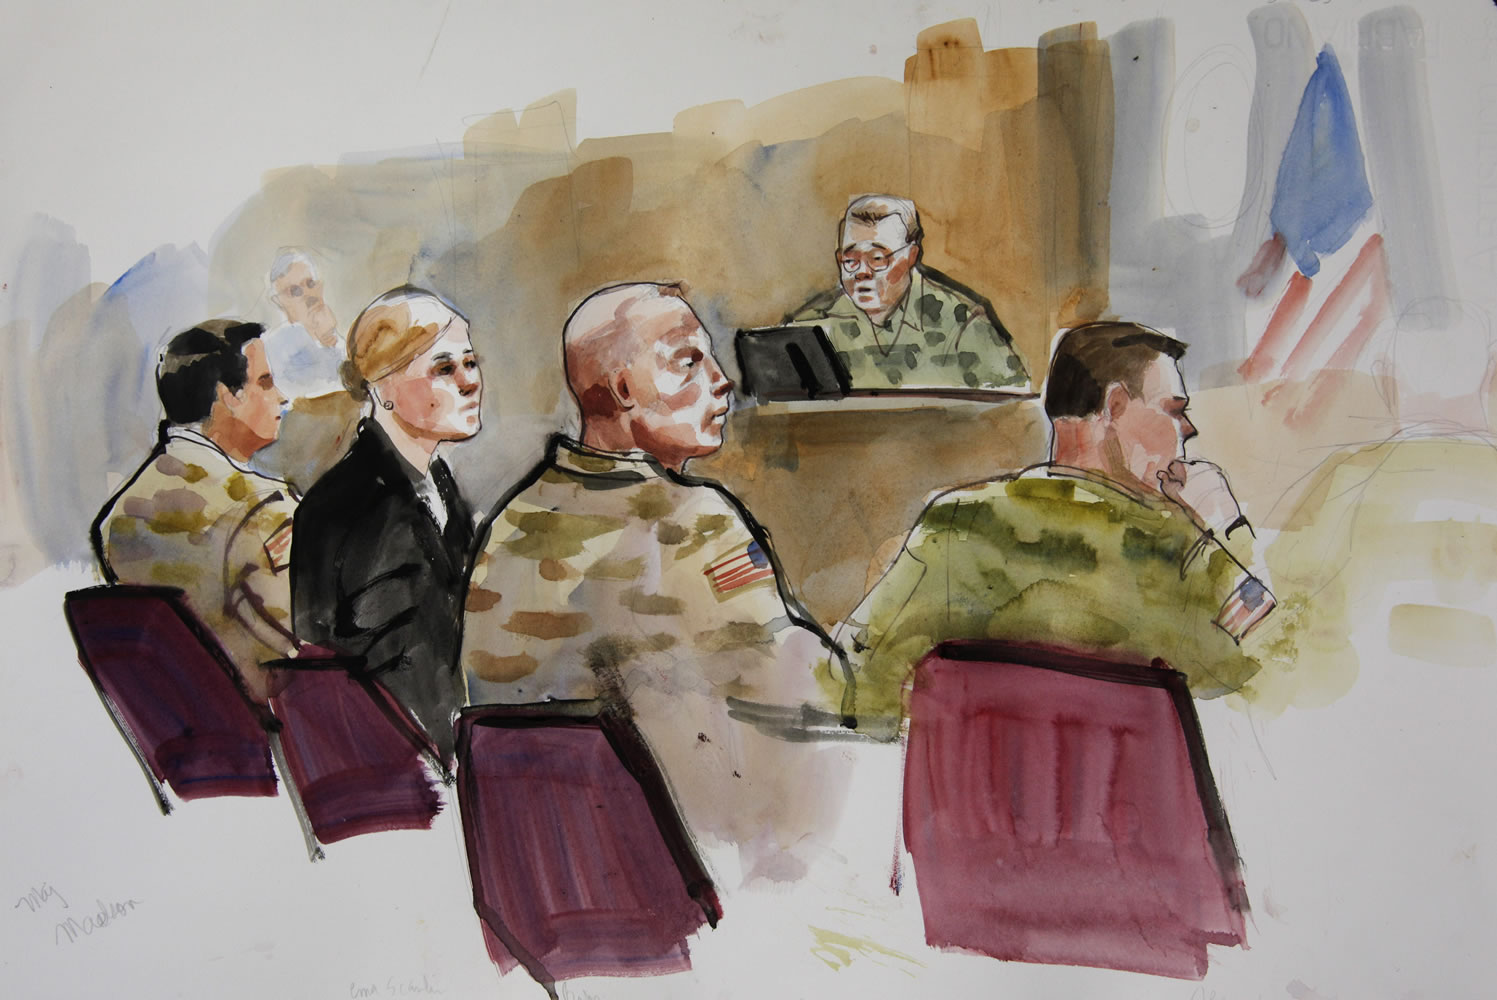 In this courtroom sketch, U.S. Army Staff Sgt. Robert Bales, third from left, is shown Monday during a preliminary hearing in a military courtroom at Joint Base Lewis McChord in Washington. Bales is accused of 16 counts of premeditated murder and six counts of attempted murder for a pre-dawn attack on two villages in Kandahar Province in Afghanistan in March 2012. At top is Investigating Officer Col.